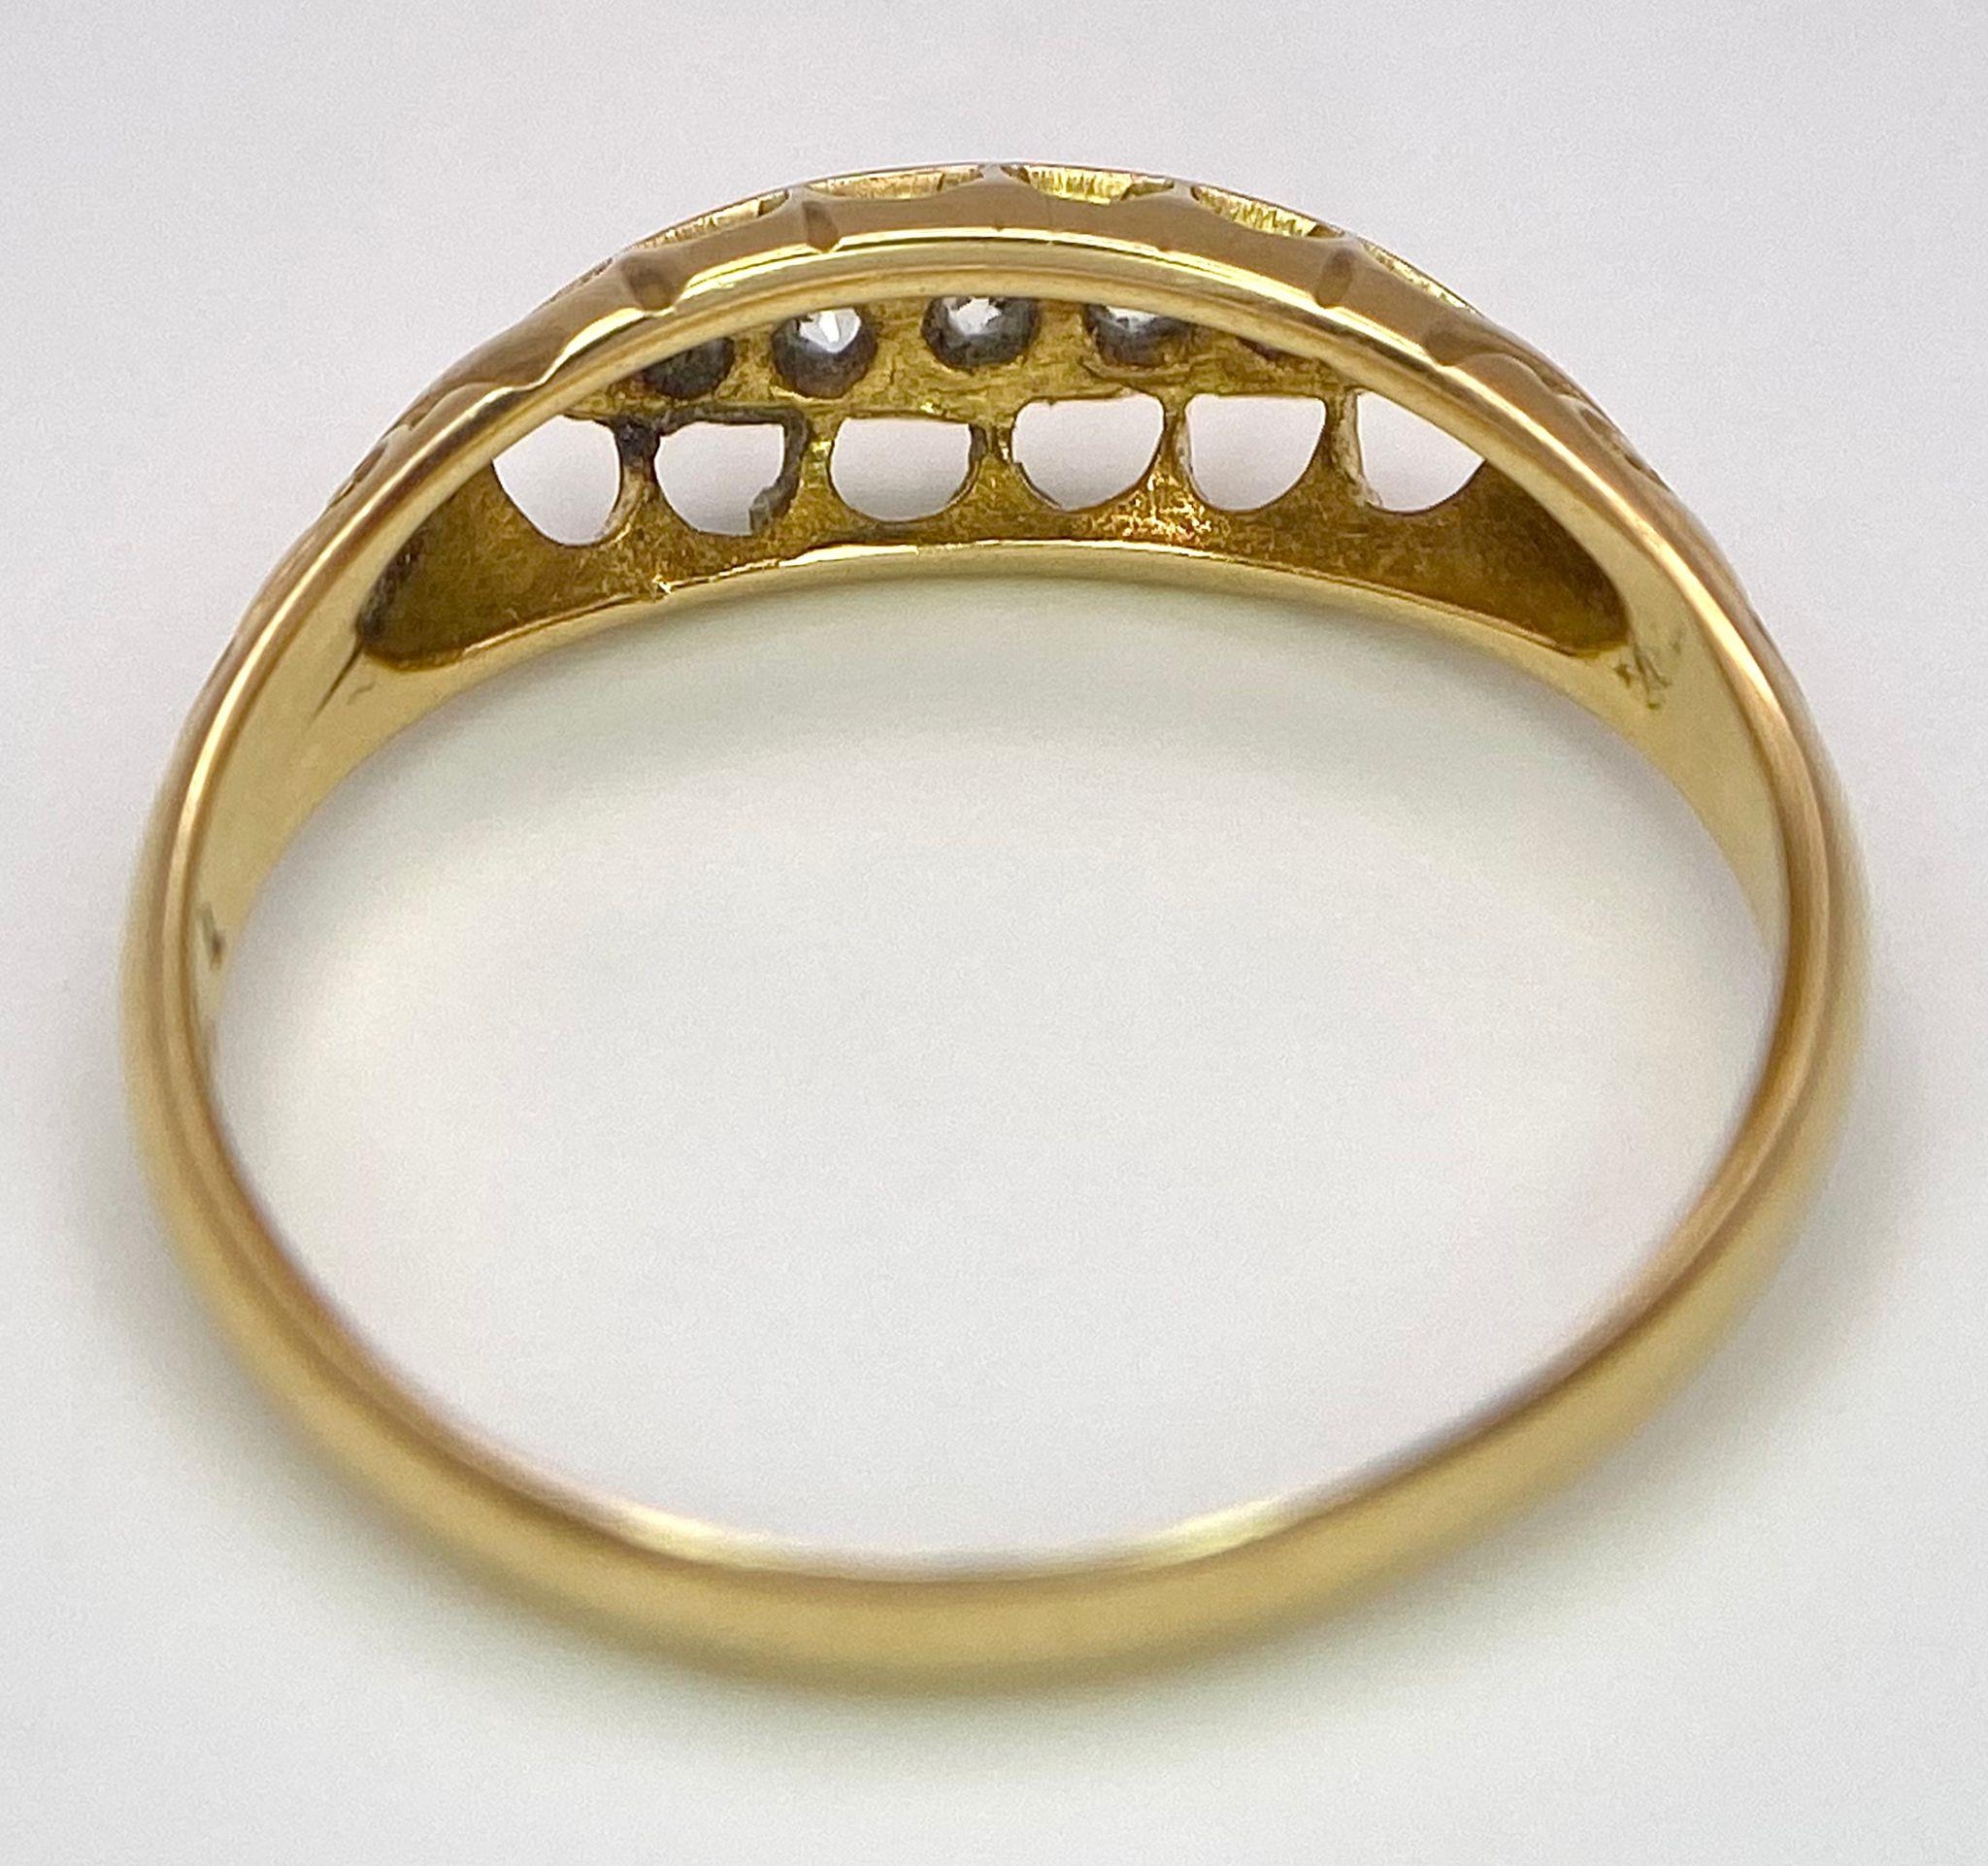 A Vintage 18K Yellow Gold Five Stone Diamond Ring. Full UK hallmarks. Size P. 2.5g total weight. - Image 5 of 8